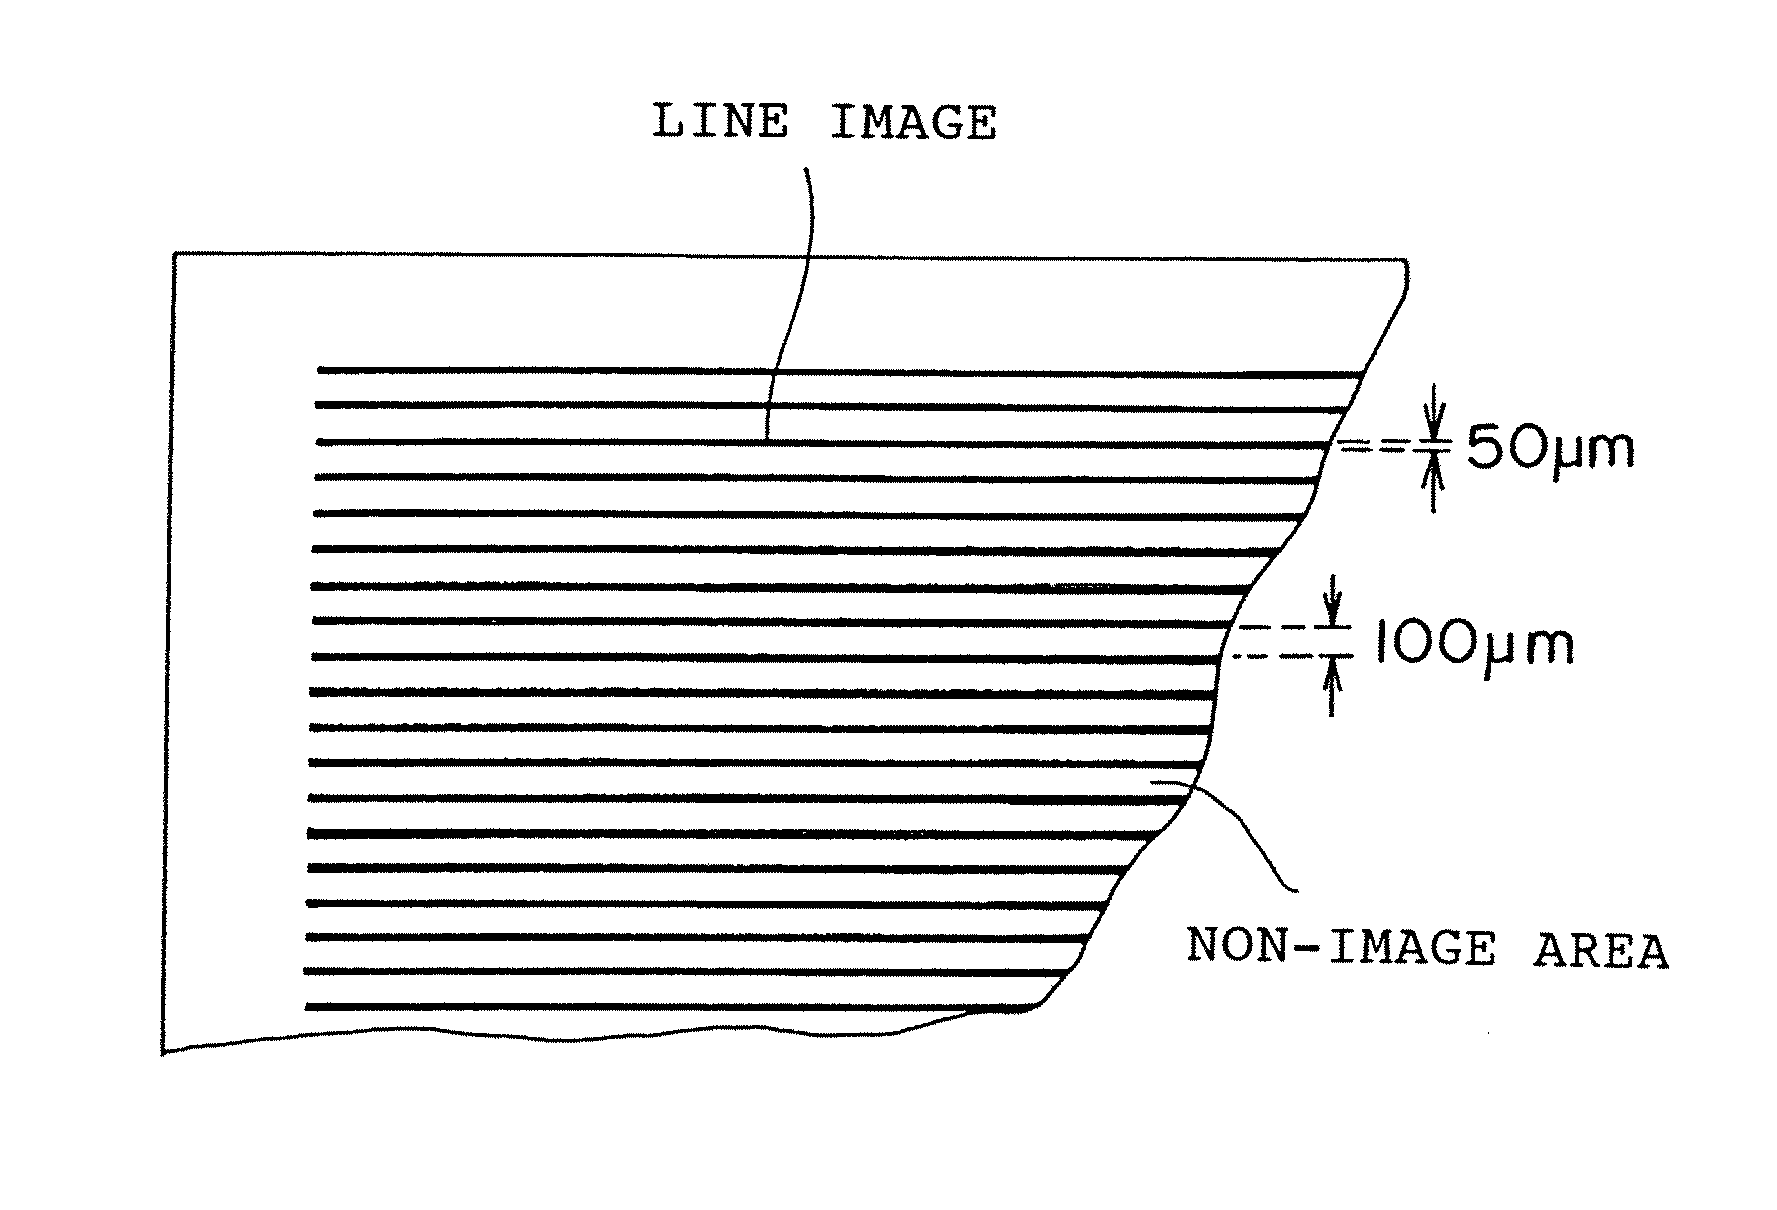 Dry toner, method for producing dry toner, and method for forming an image